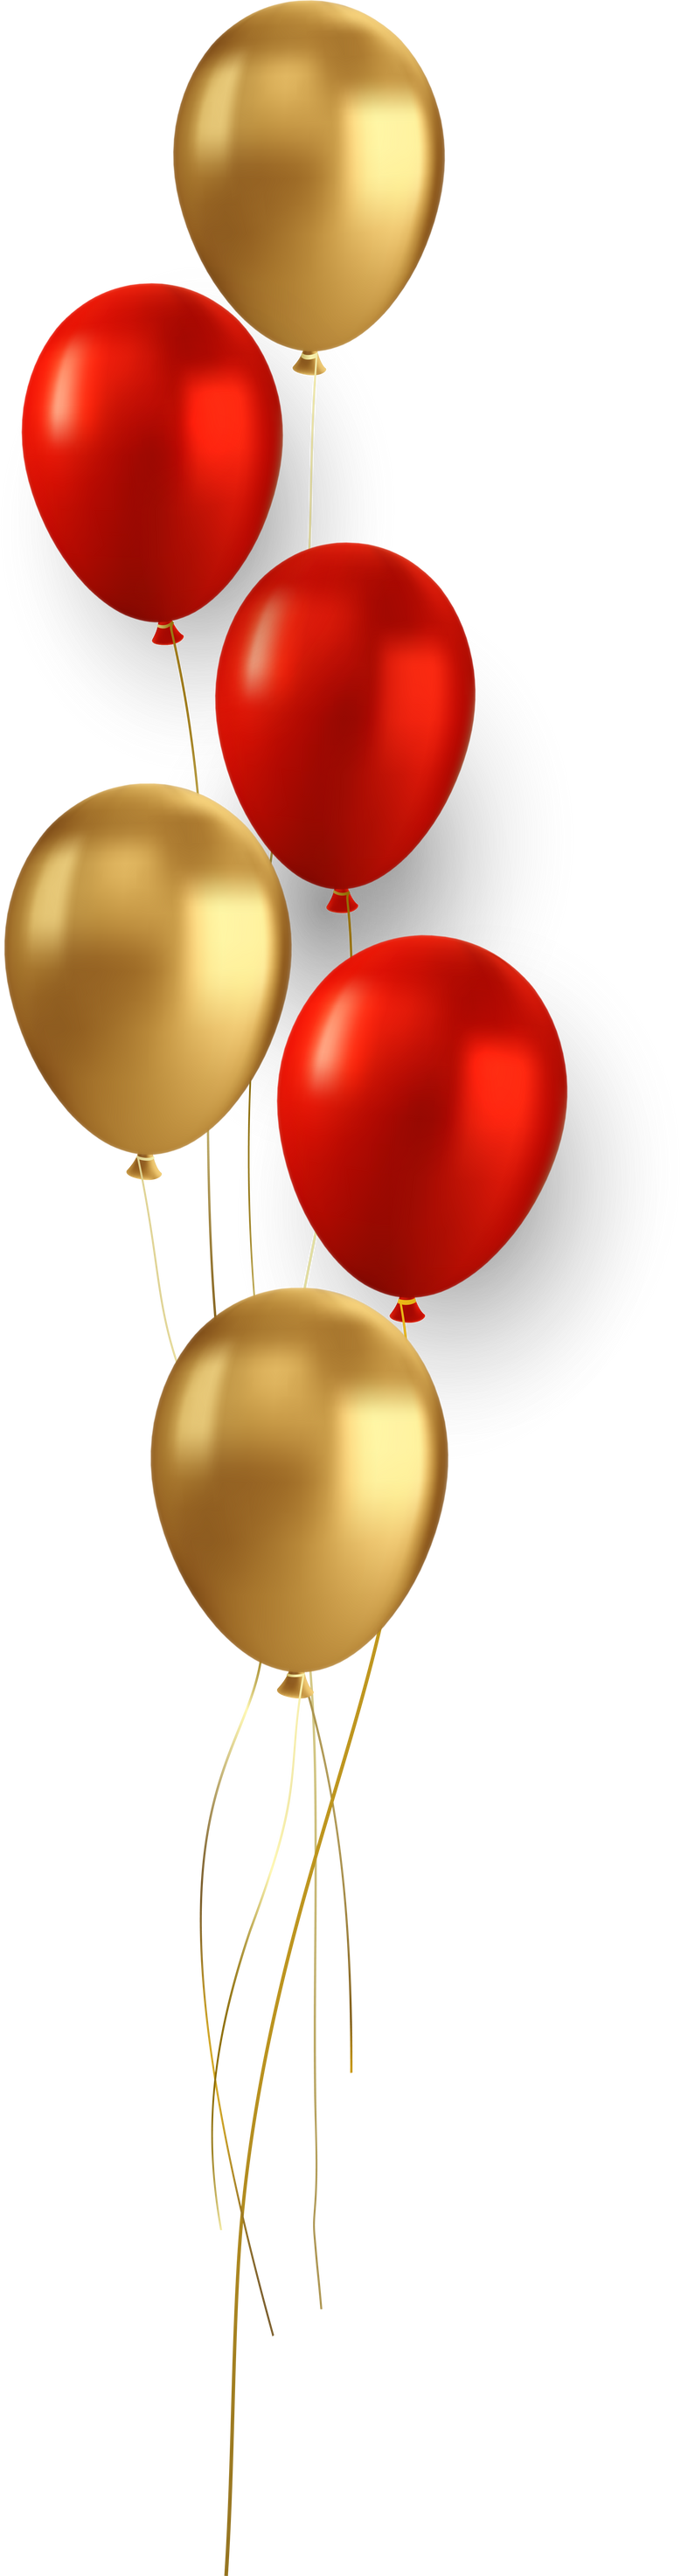 Red Gold balloons